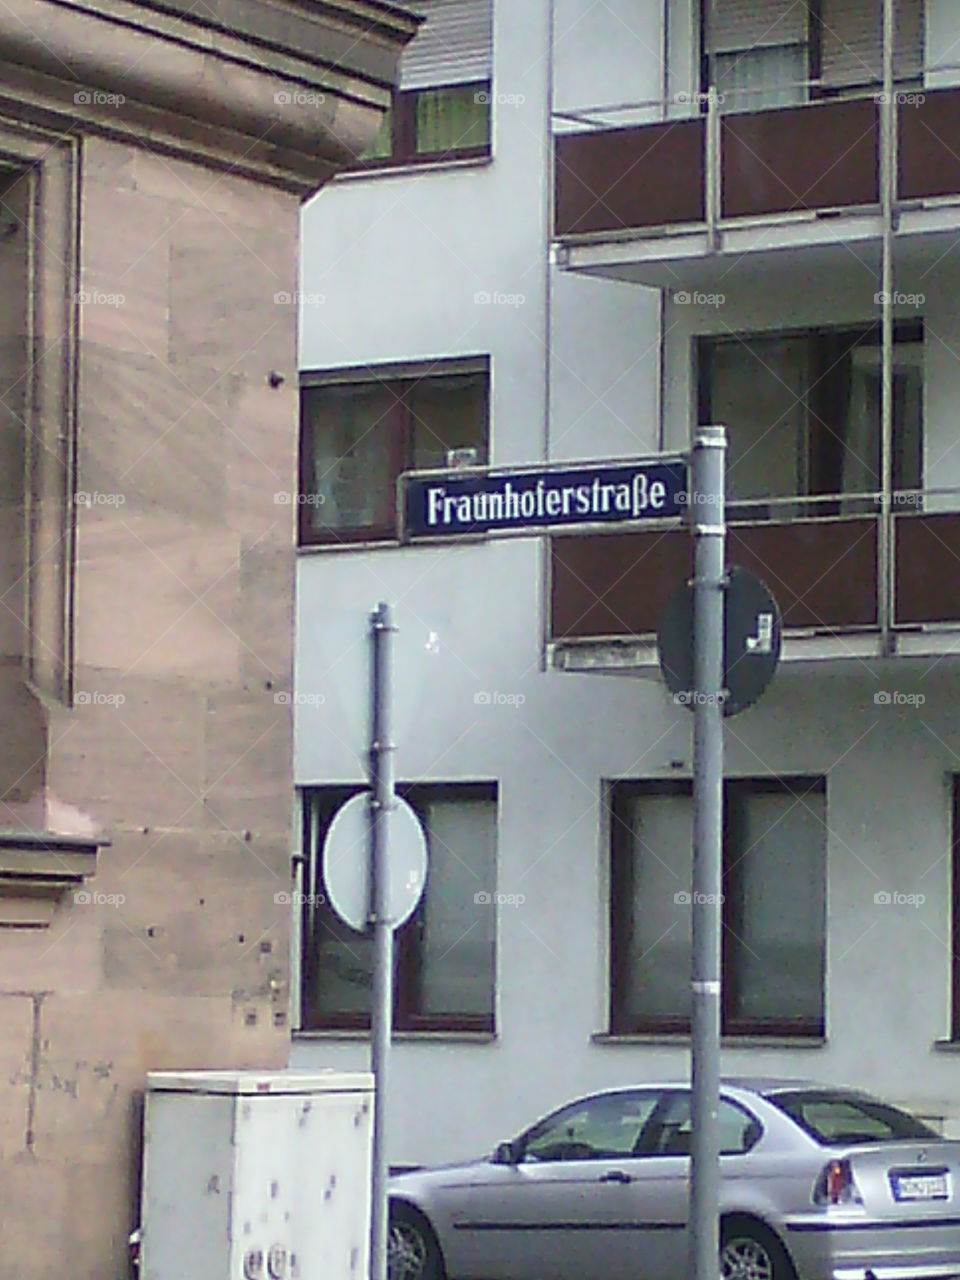 street sign in a german city